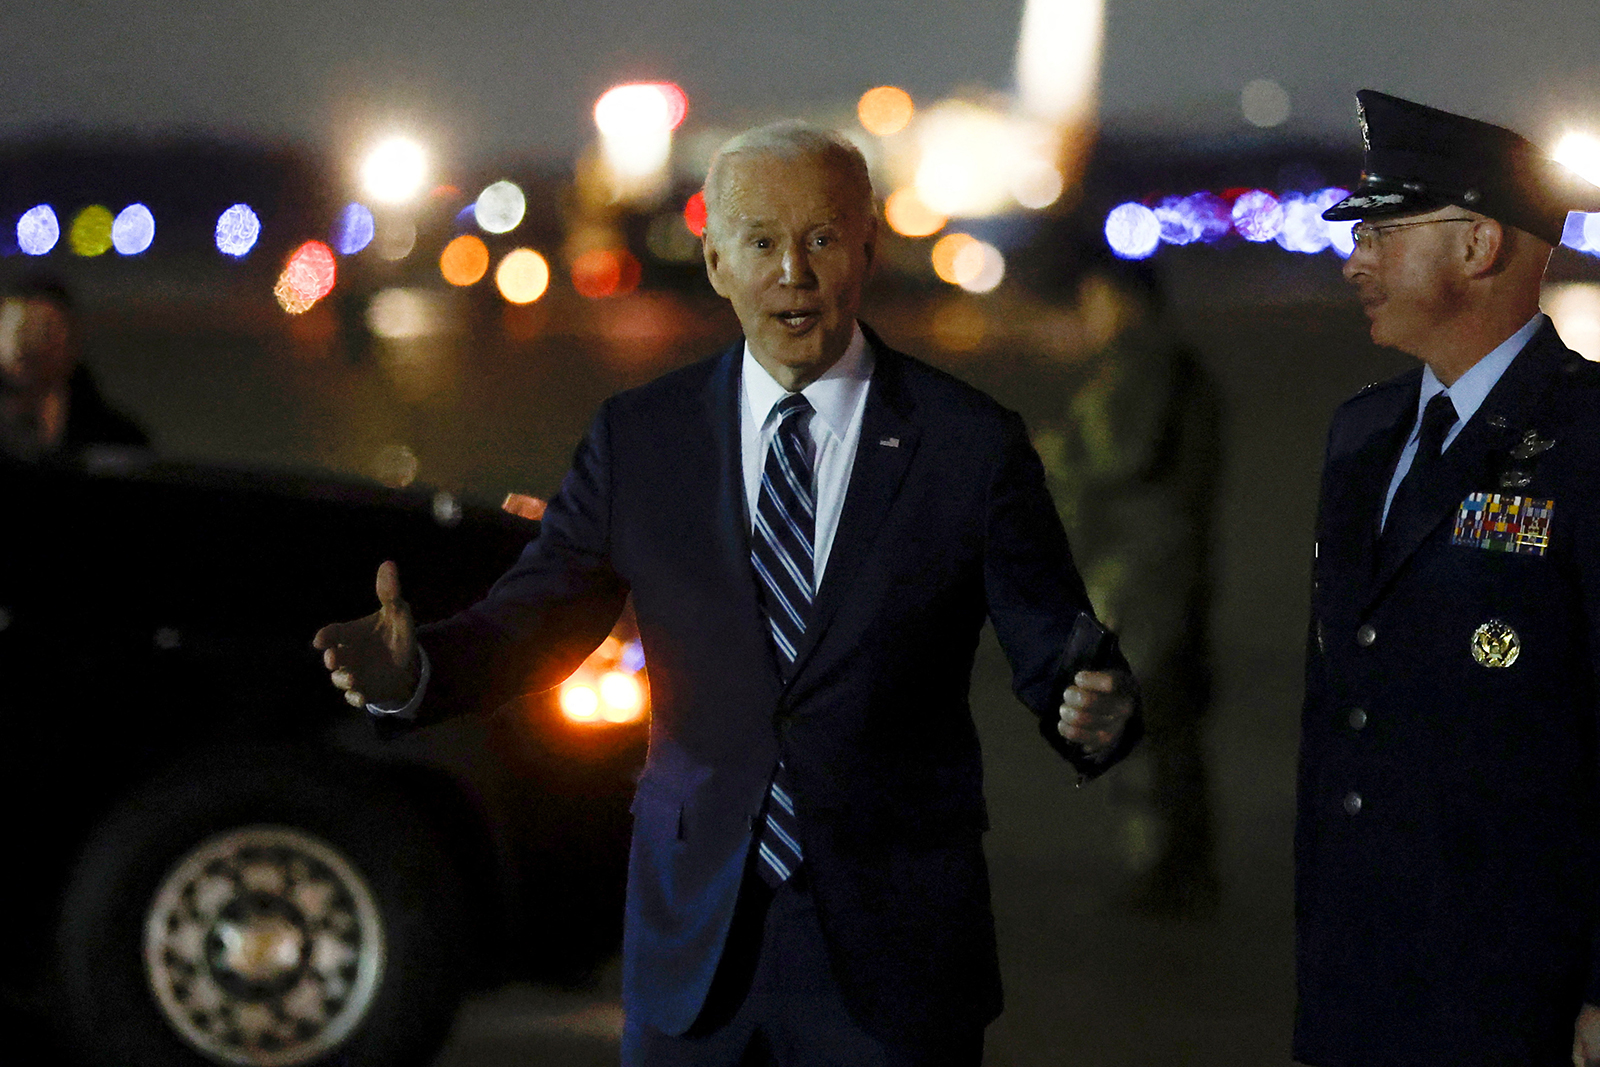 President Biden tells reporters “We’re going to win tonight in Georgia” as he arrives at Joint Base Andrews in Maryland on Tuesday.